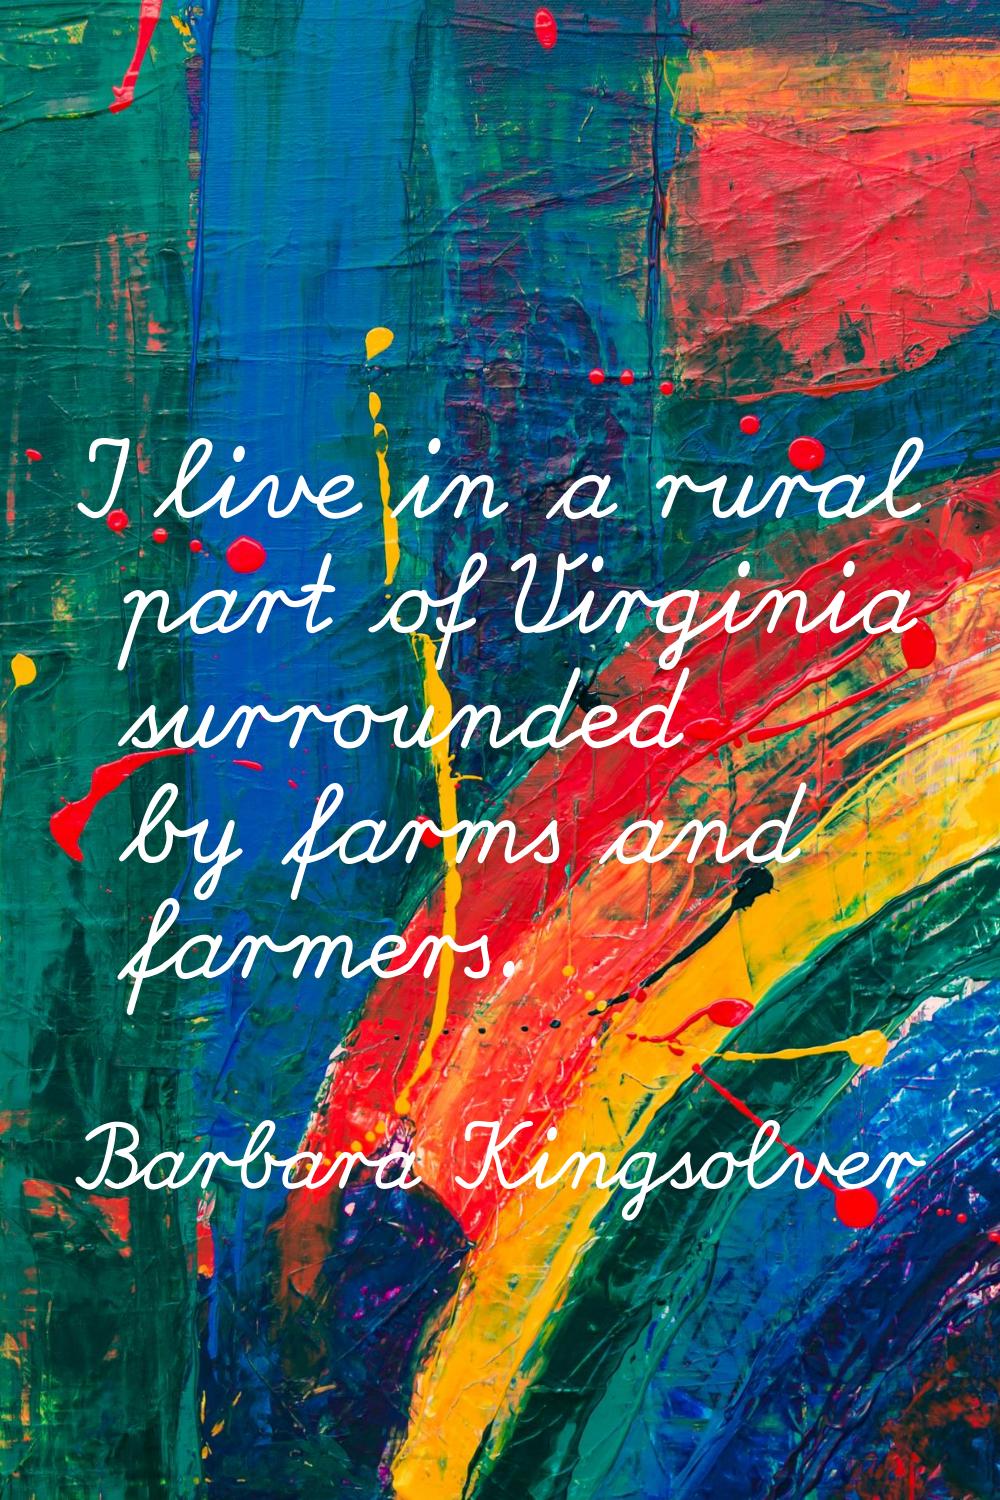 I live in a rural part of Virginia surrounded by farms and farmers.